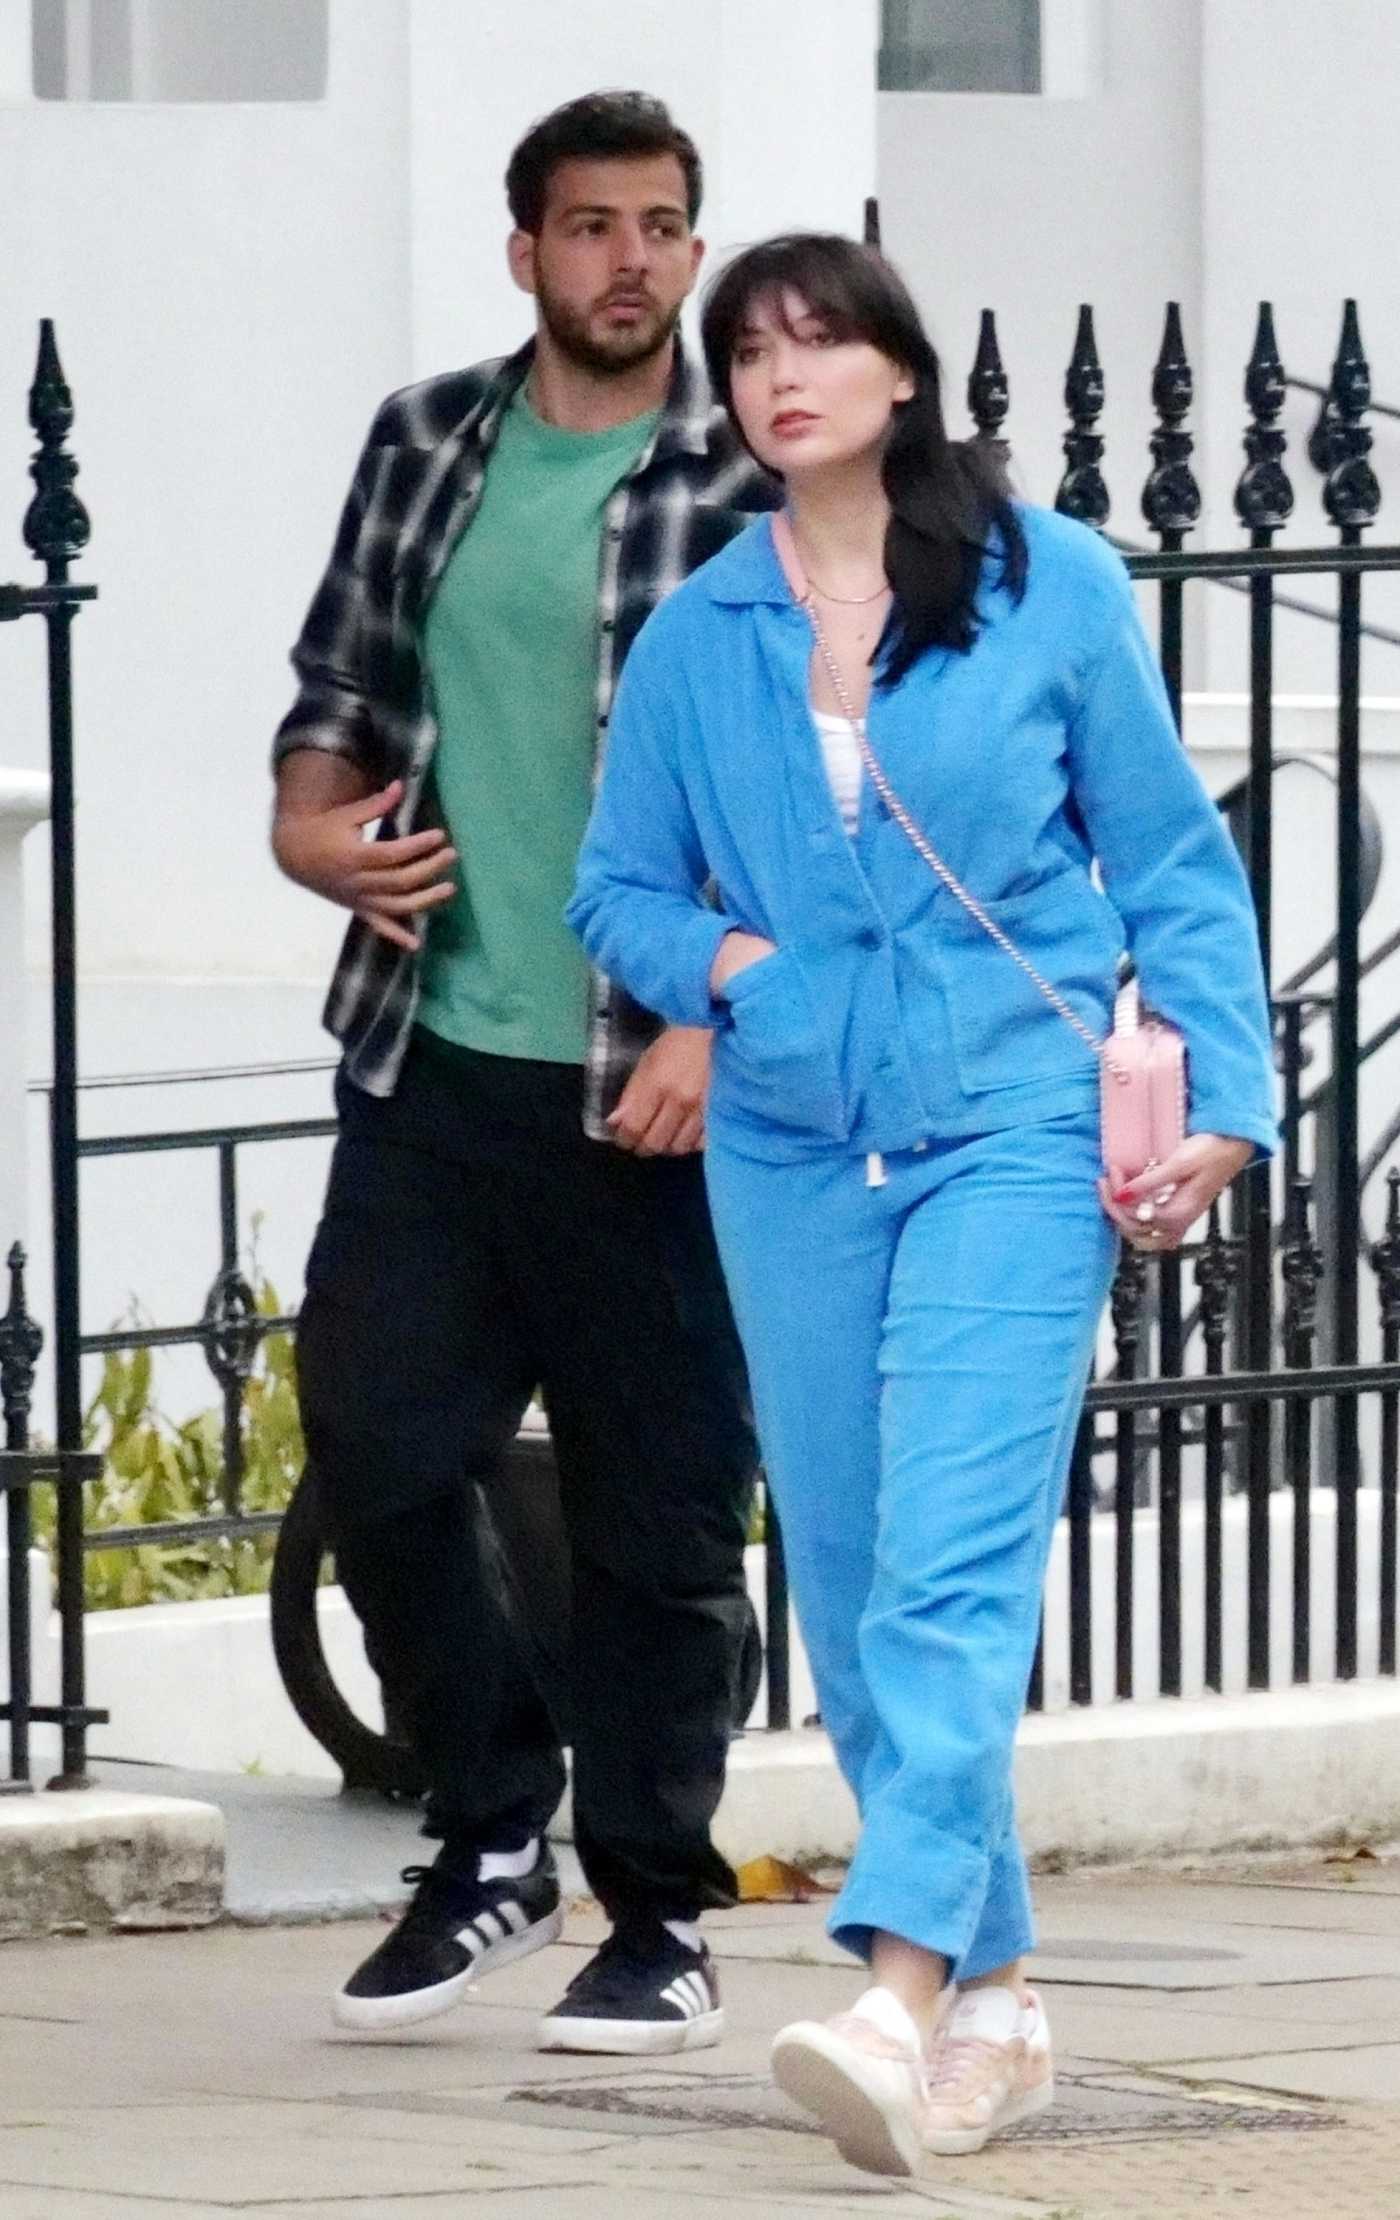 Daisy Lowe in a Baby Blue Pantsuit Was Seen Out with Her Boyfriend Jordan Saul in North London 05/09/2022